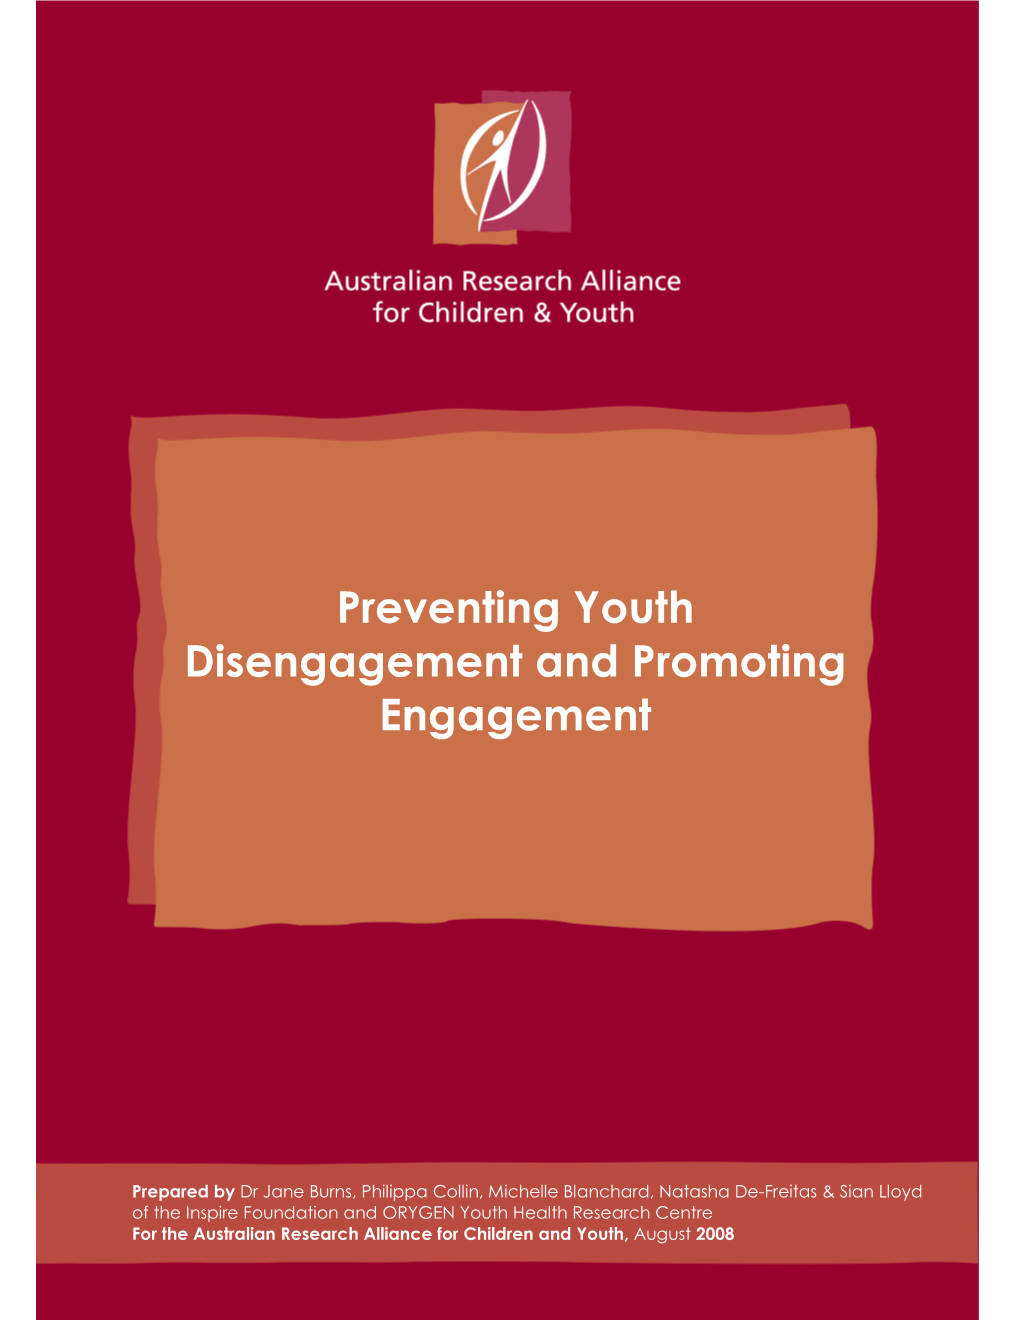 Preventing Youth Disengagement and Promoting Engagement